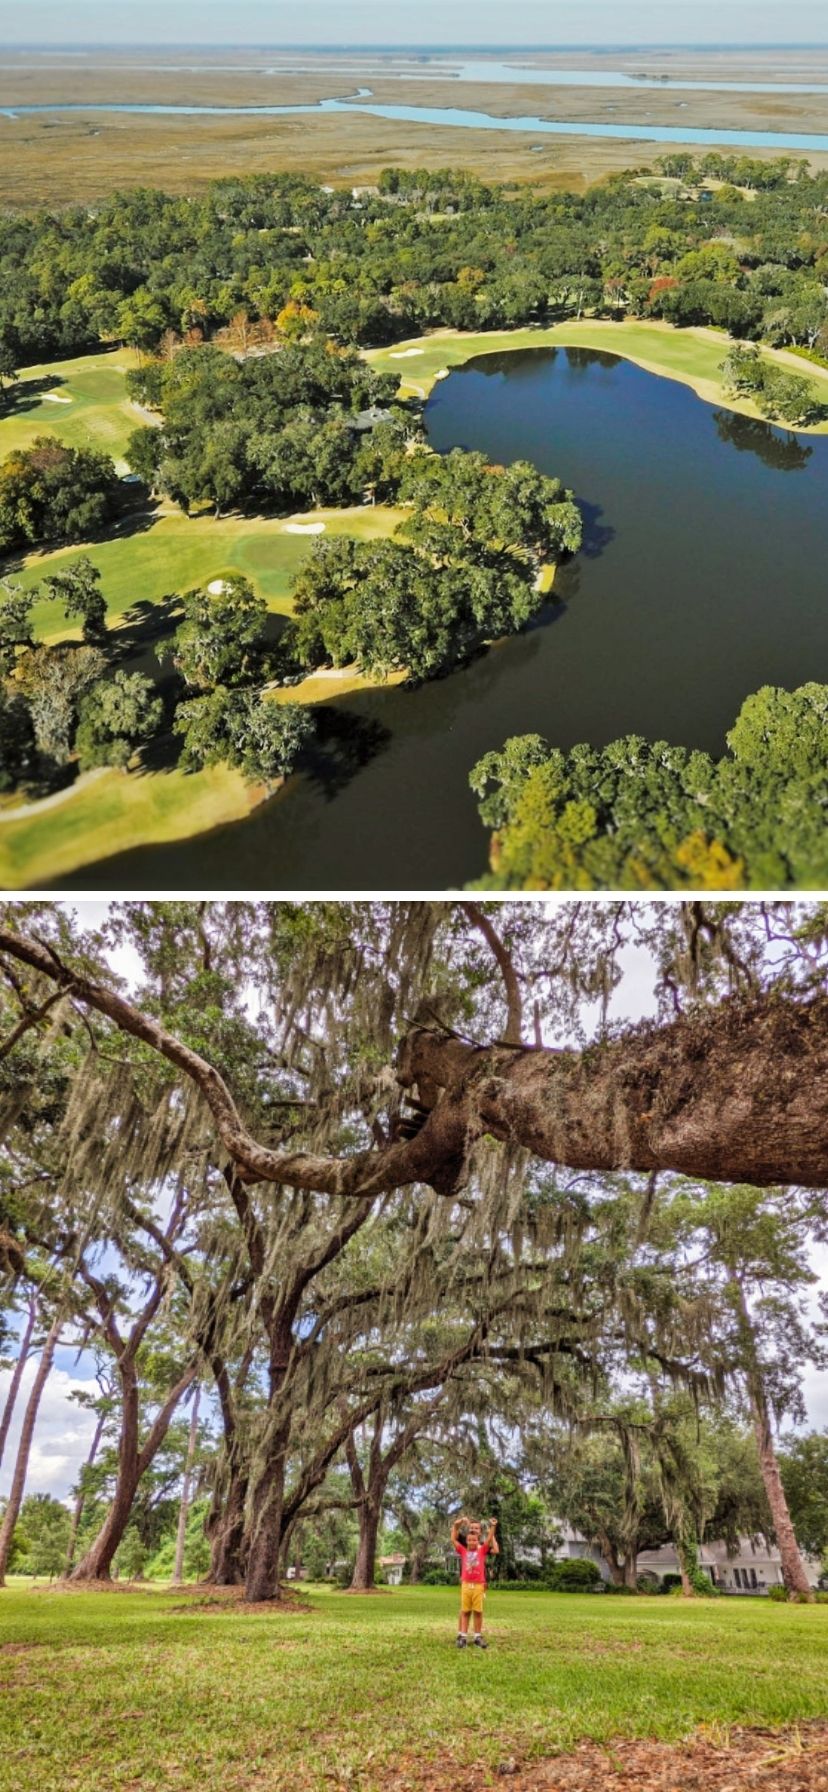 Golfing and Public Parks on St Simons Island